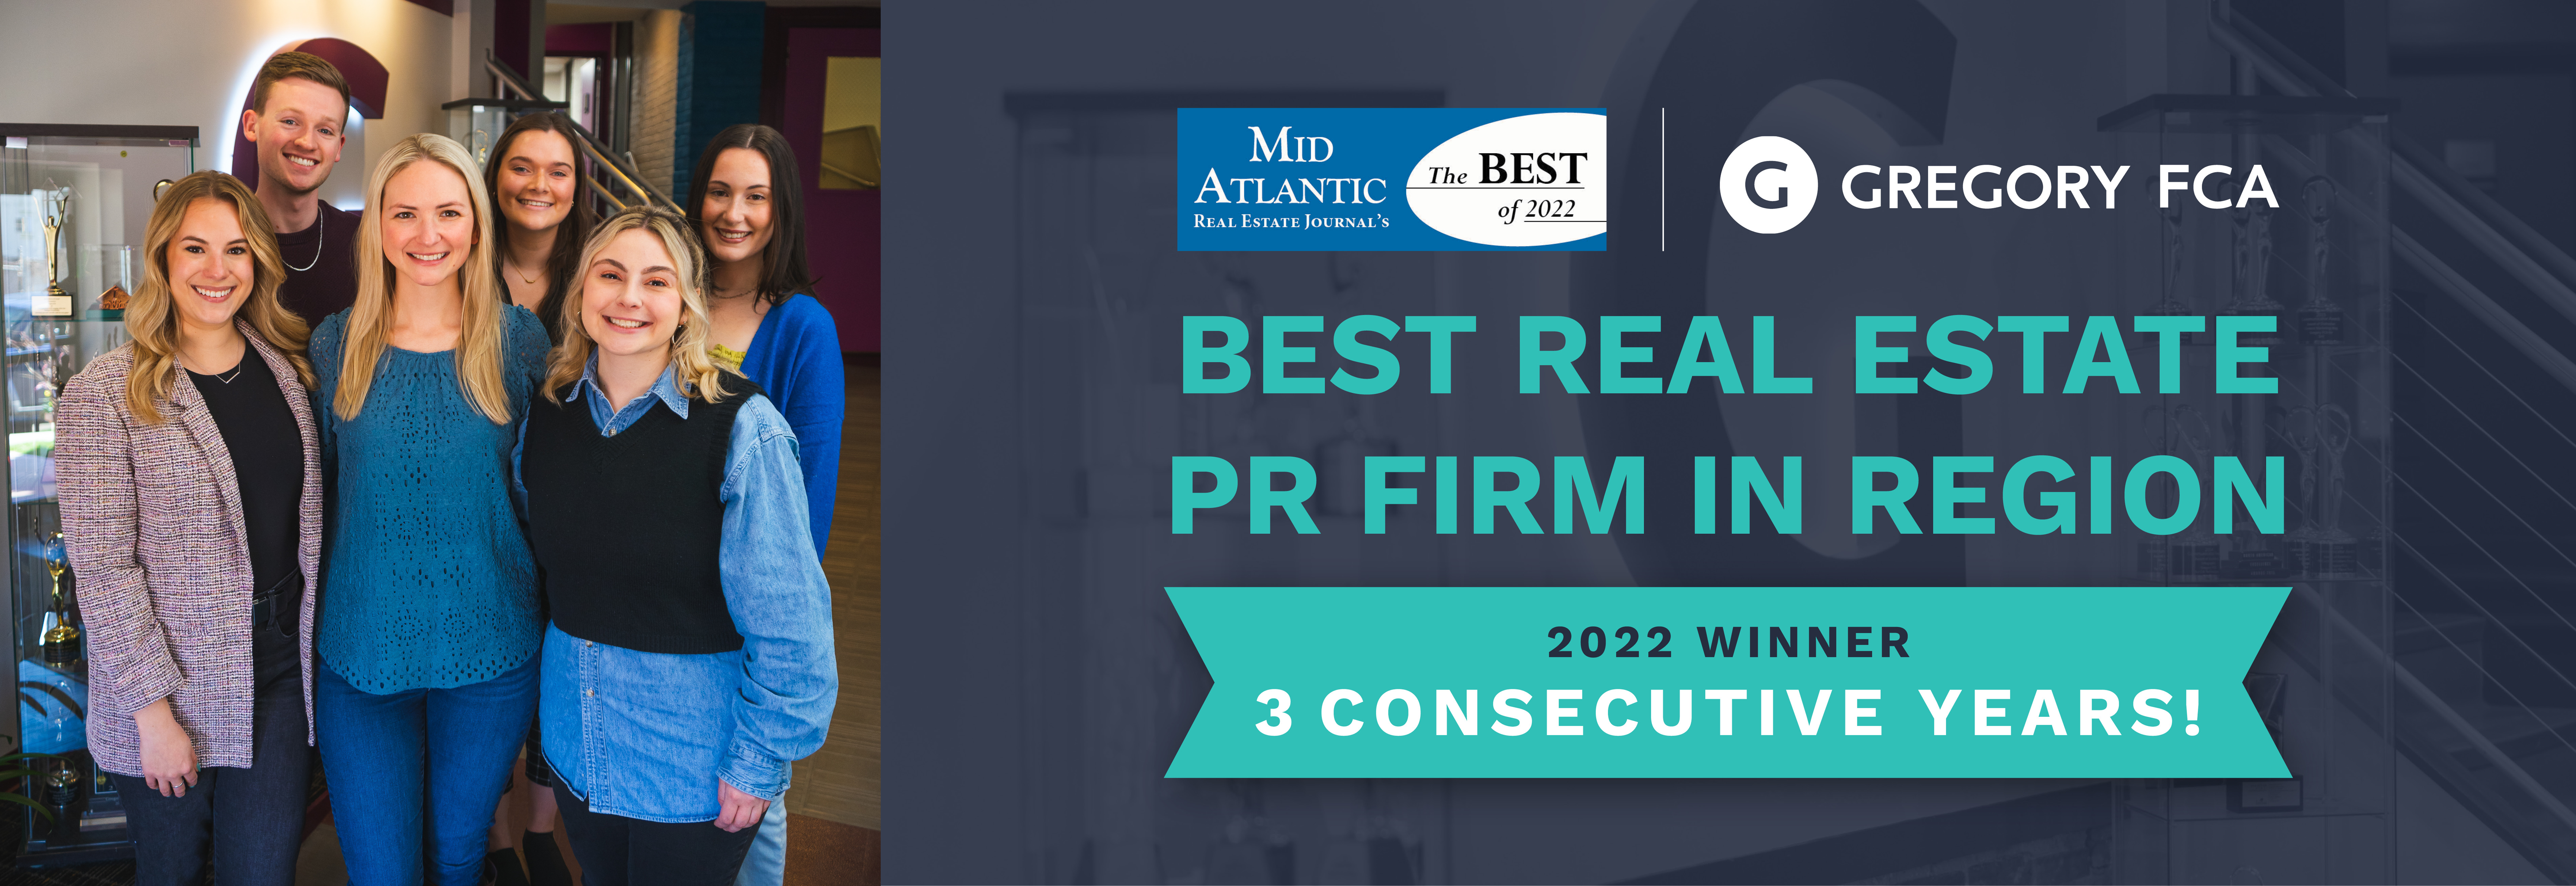 Gregory FCA wins award as ‘Best Real Estate PR Firm in the Mid Atlantic Region’ for the Third Year in a Row